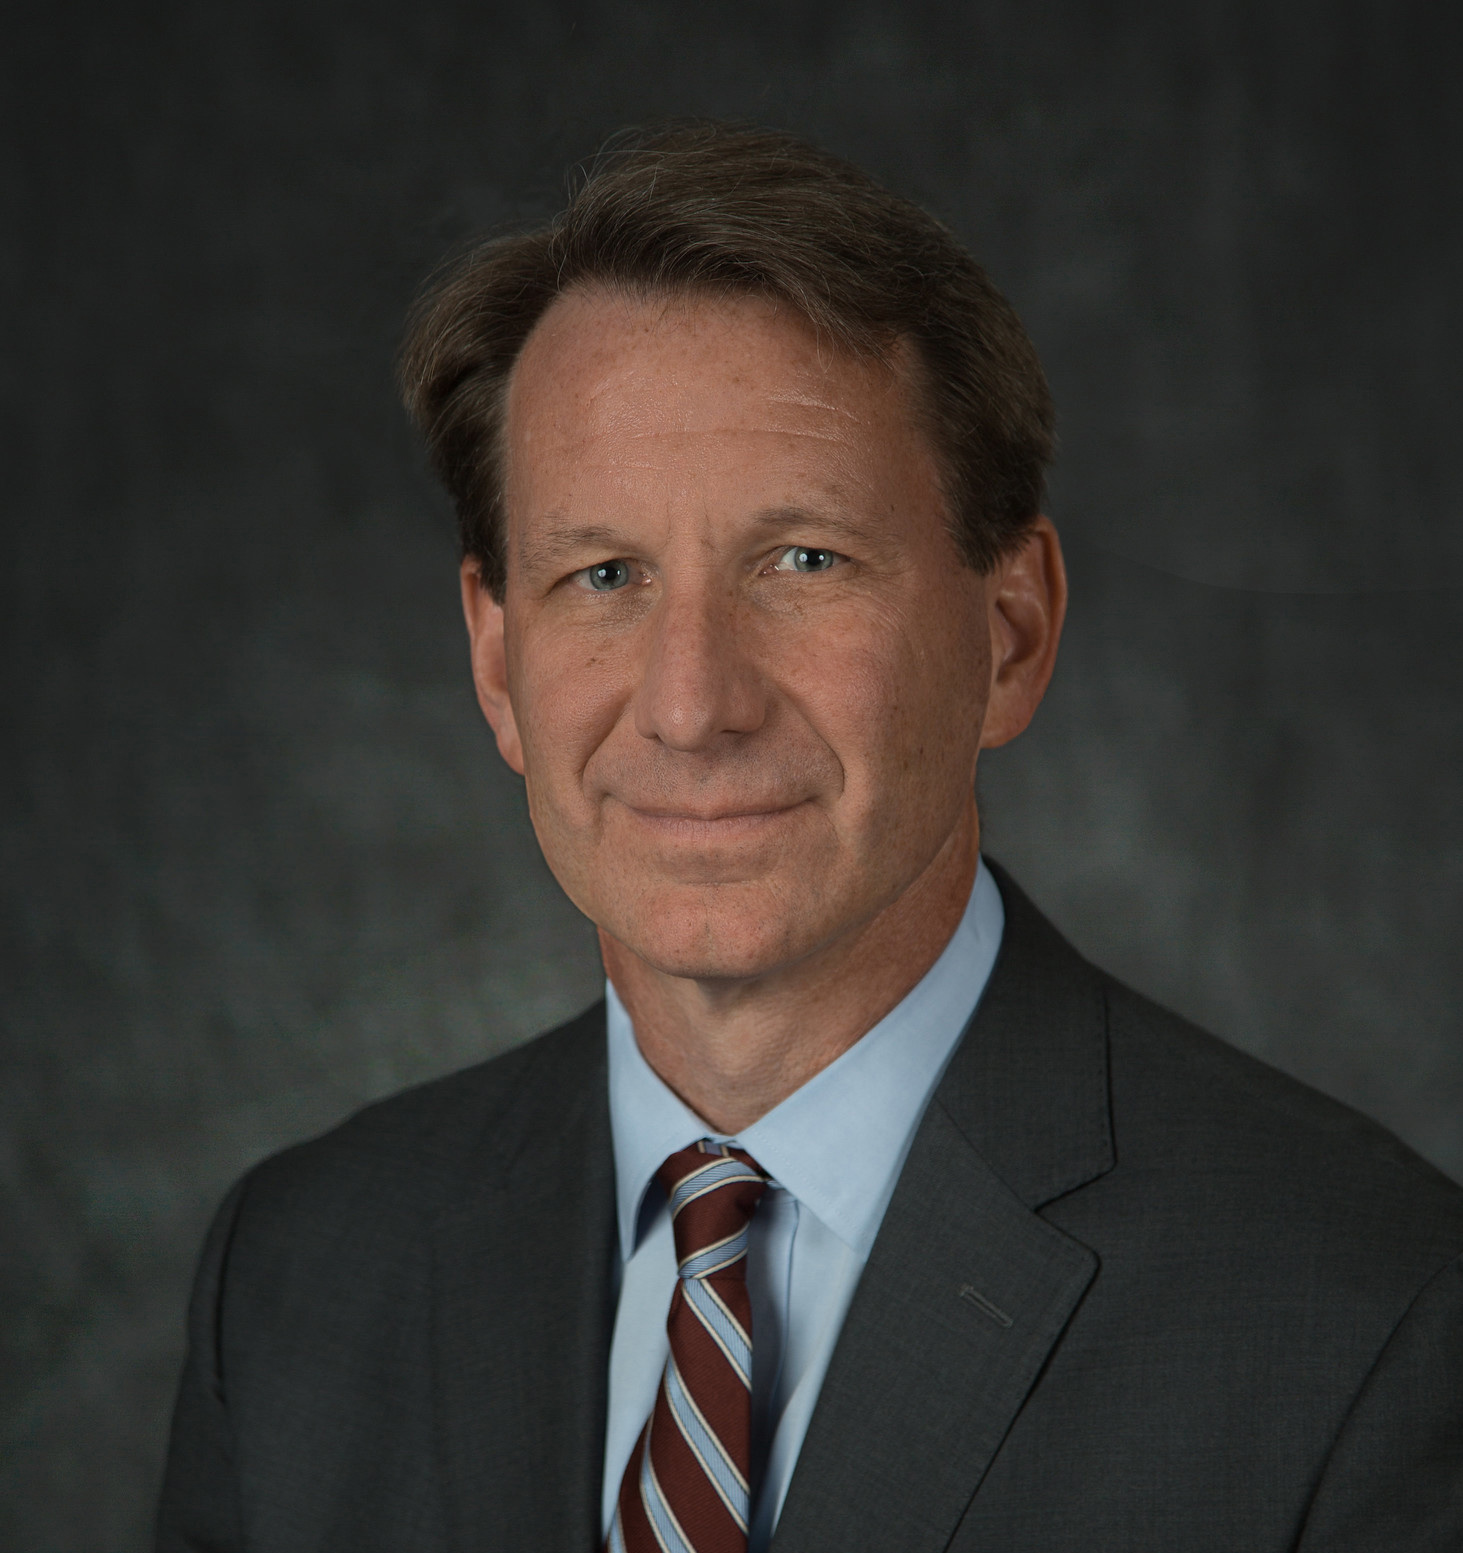 National Cancer Institute Director Norman E. “Ned” Sharpless, M.D.